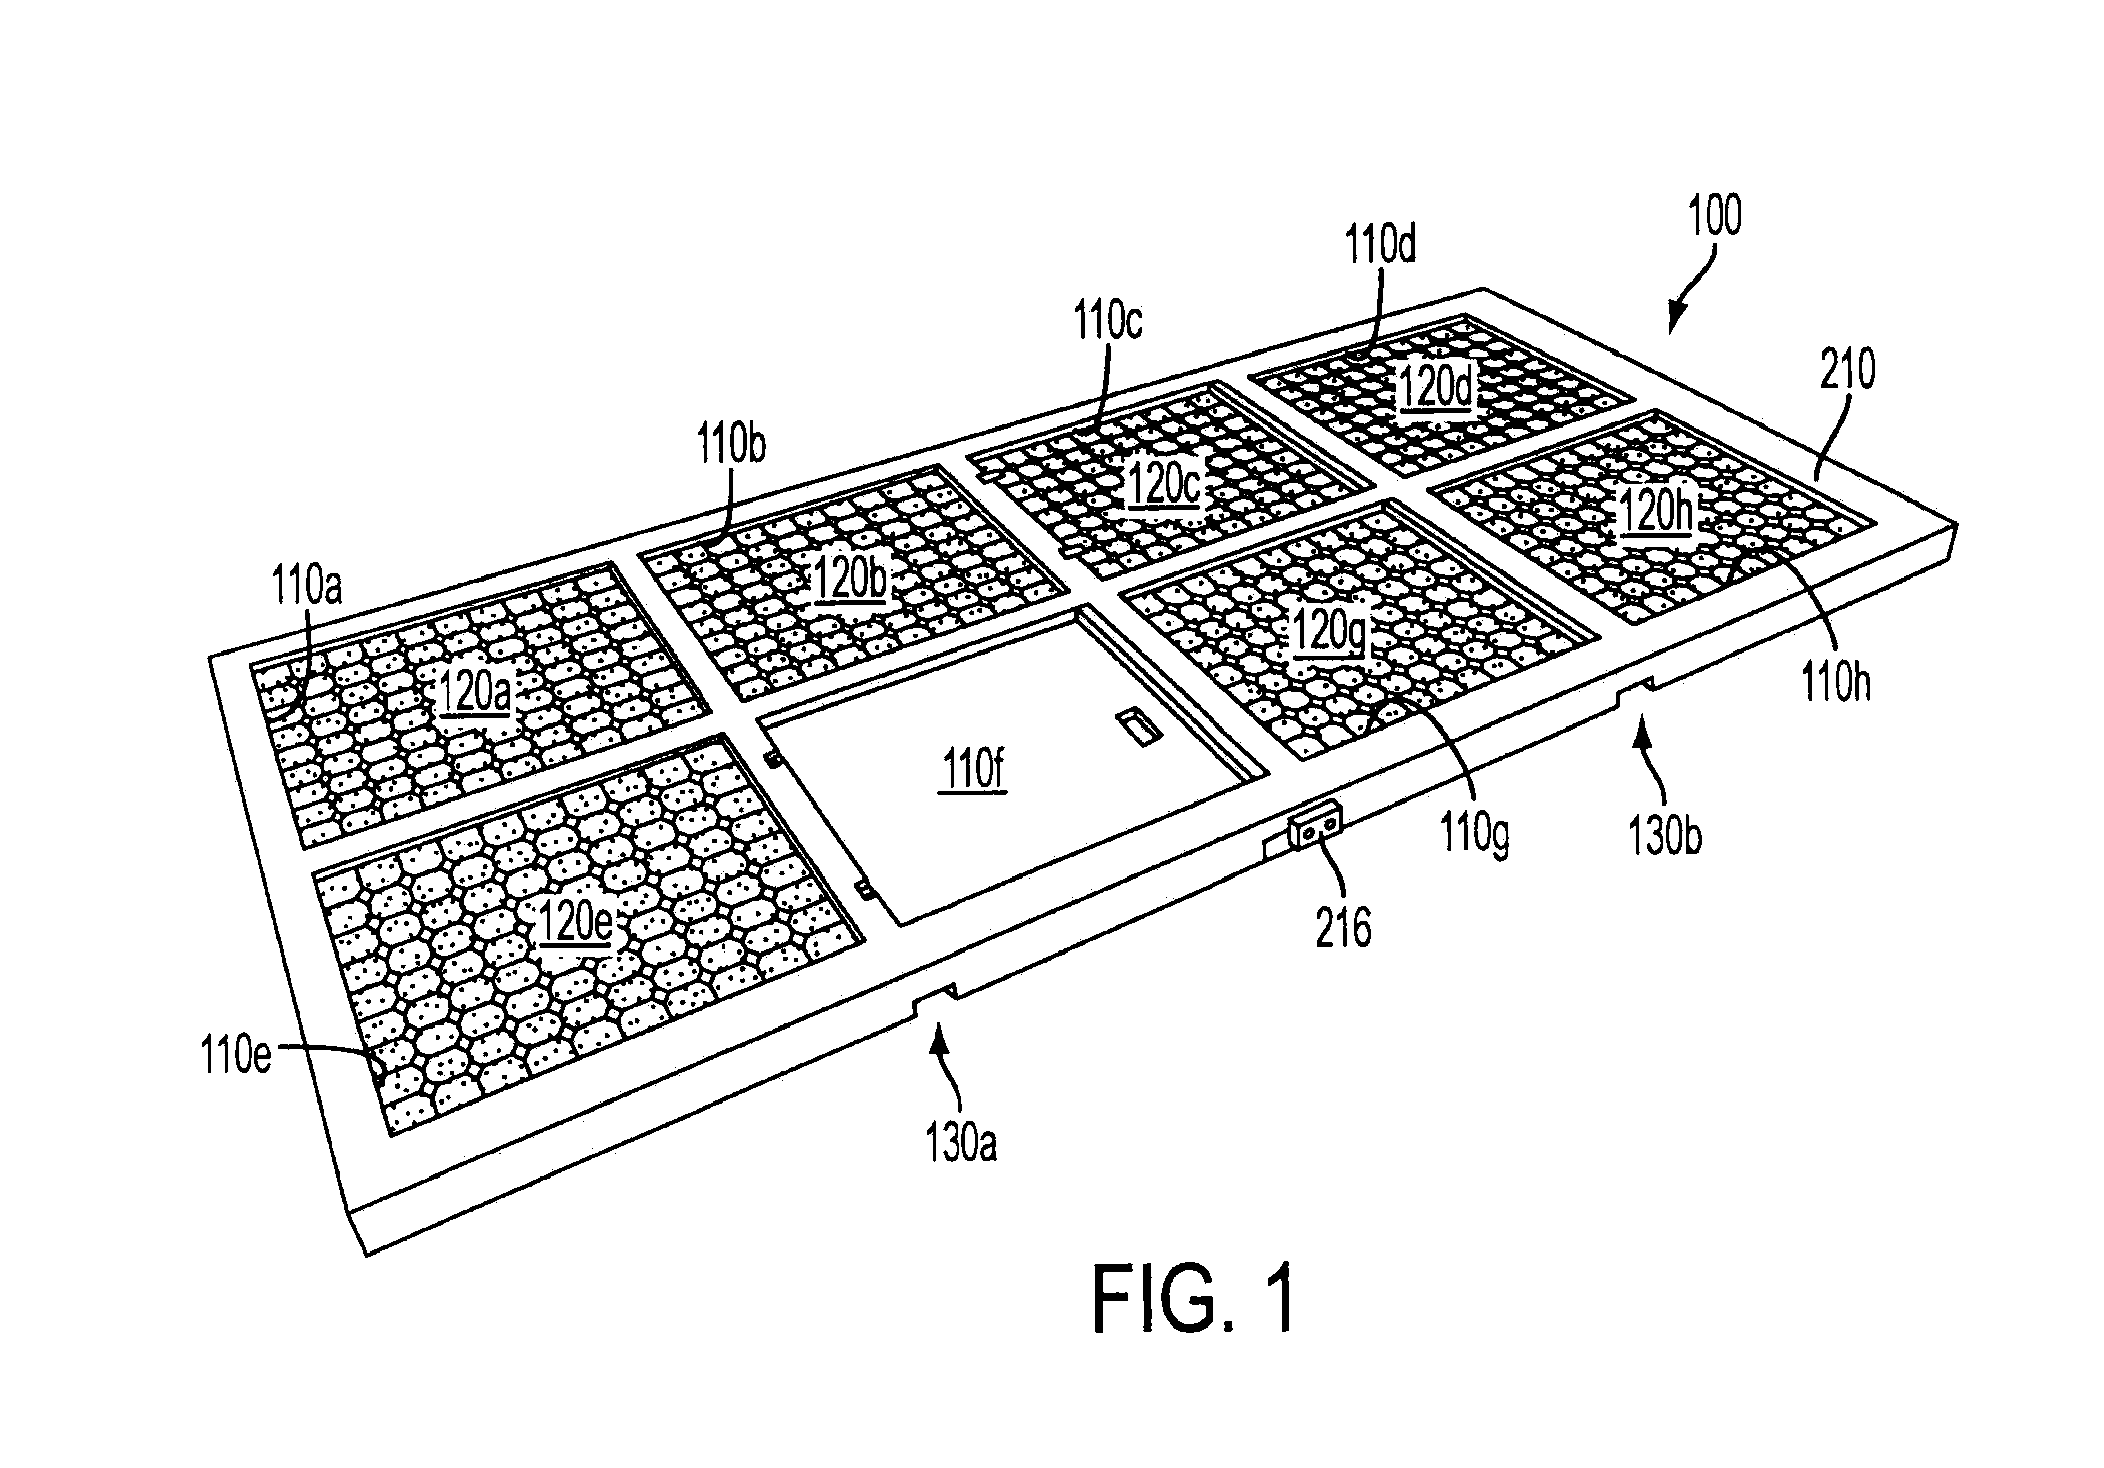 Automated installation system for and method of deployment of photovoltaic solar panels